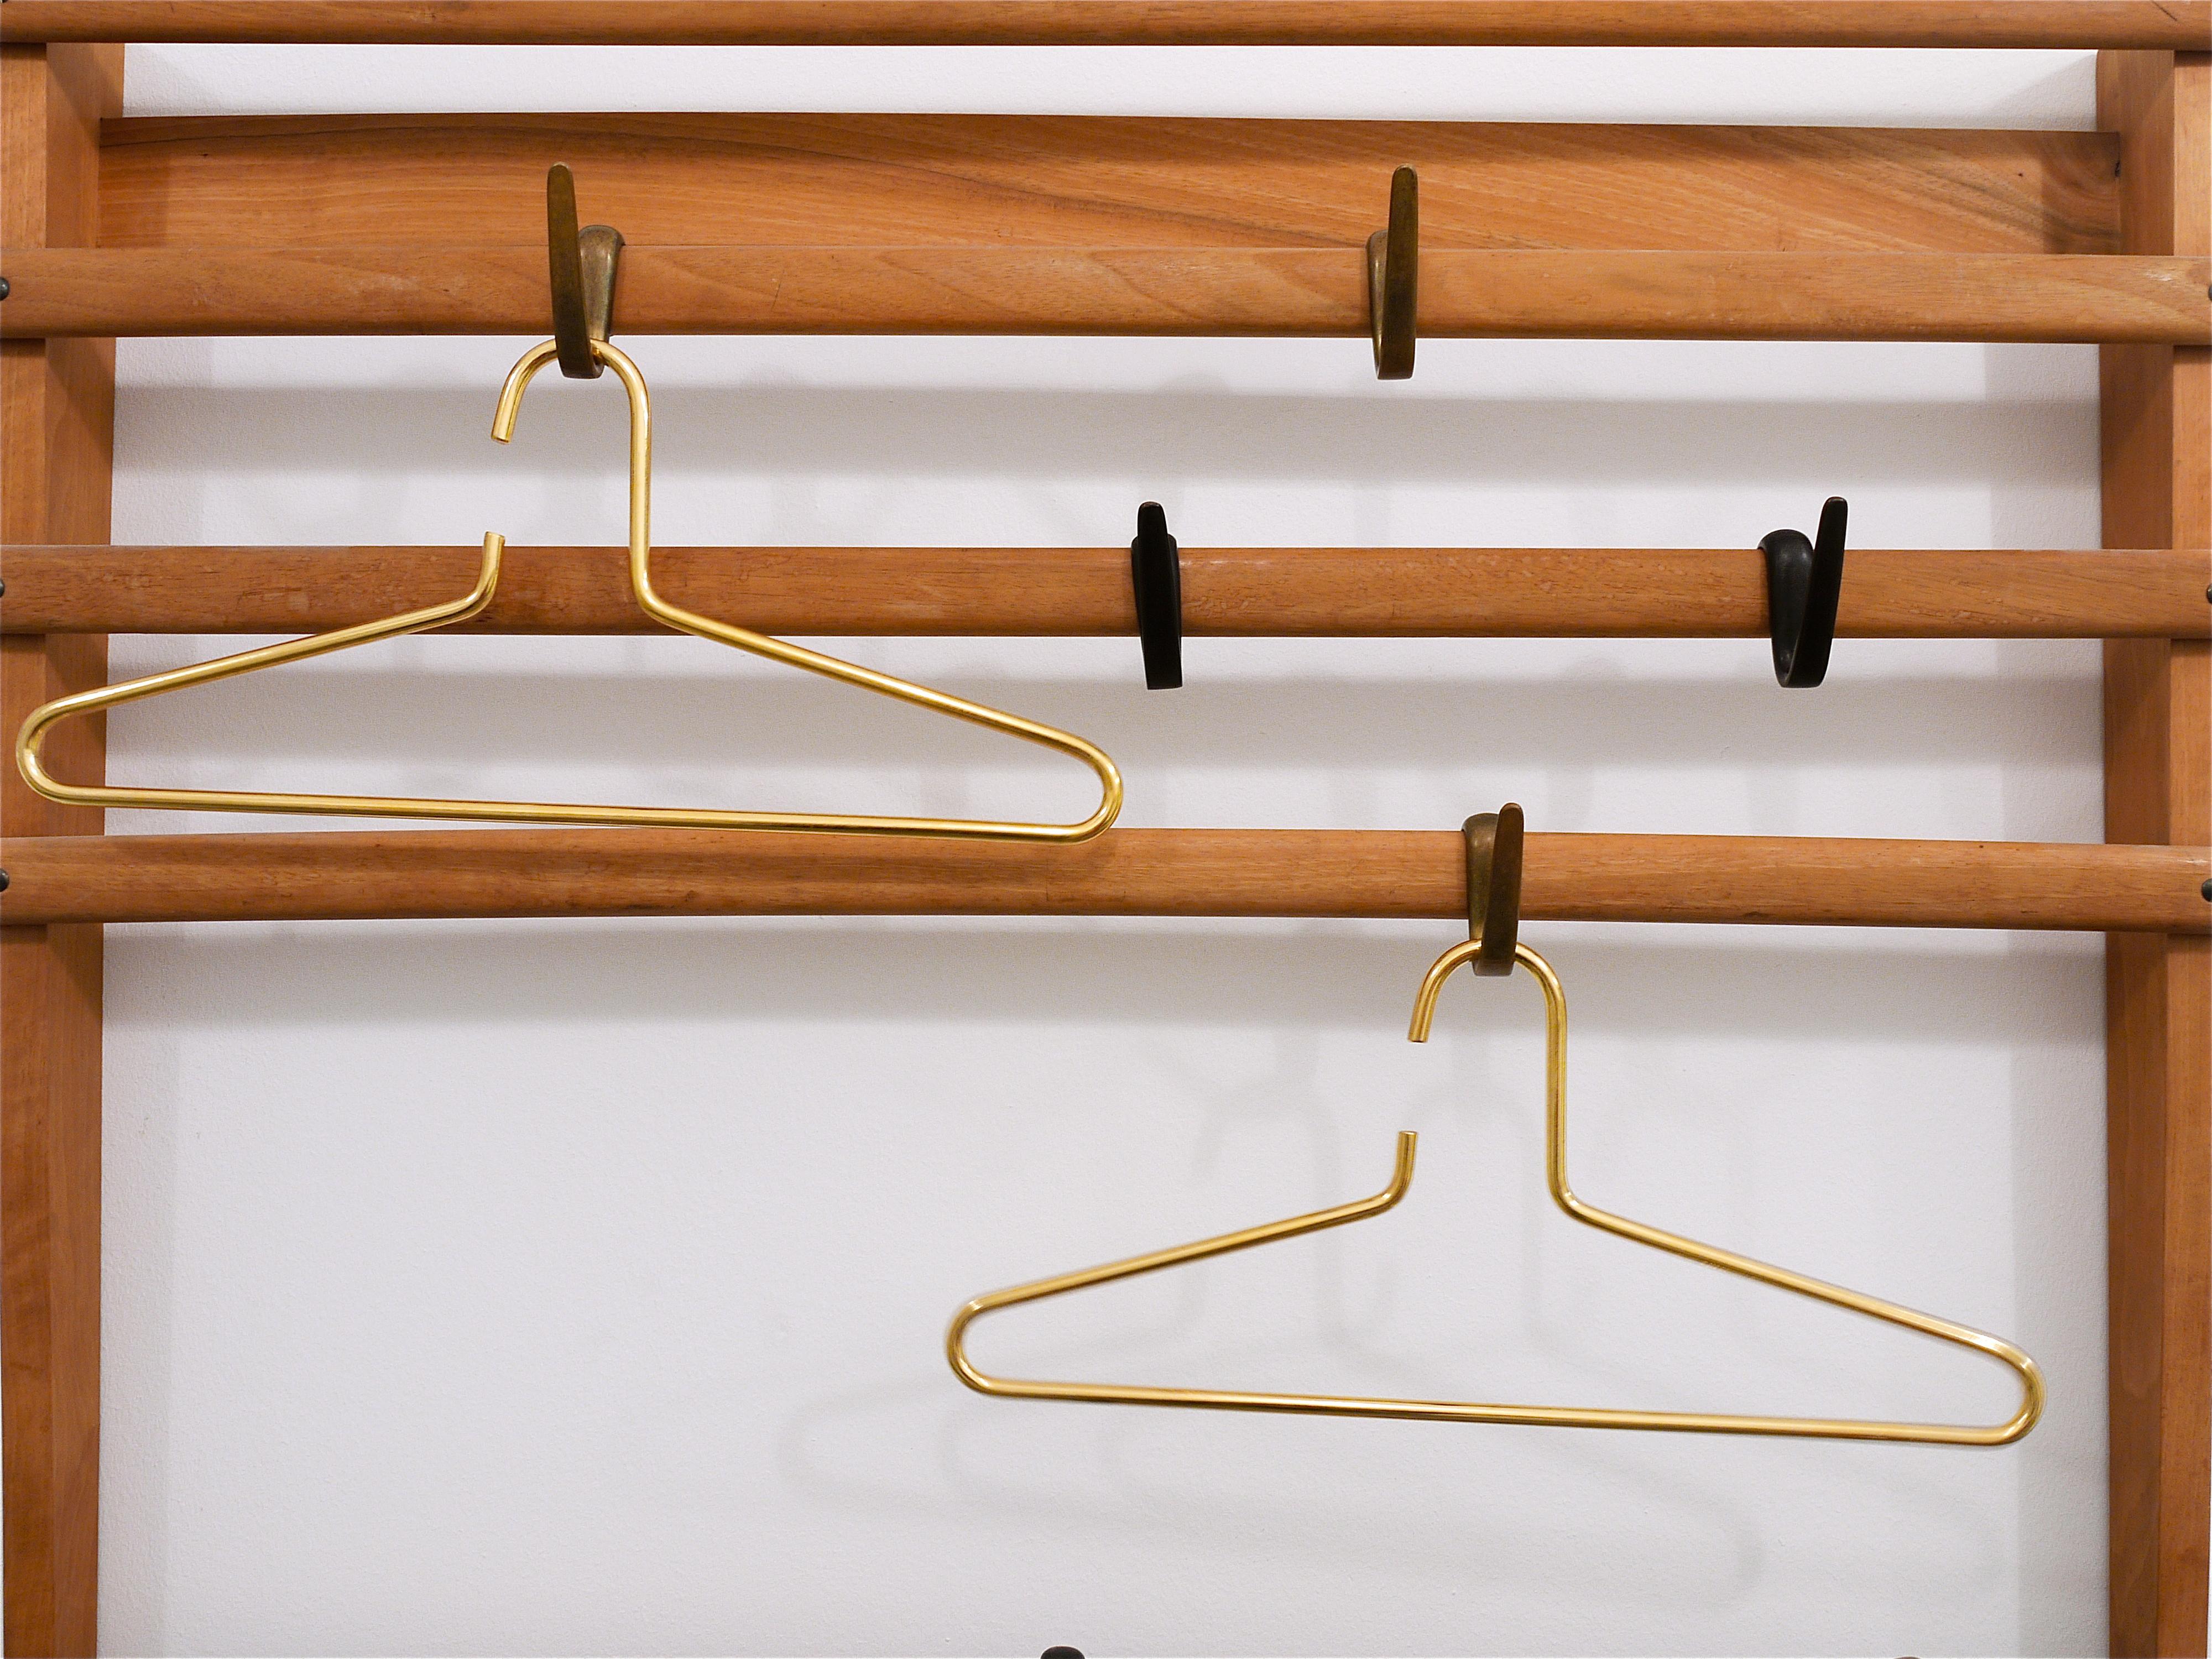 Up to 12 beautiful and heavy chrome-plated hangers executed in Austria in the 1970s. Very solid and stylish pieces in excellent condition. Measures: 16 1/2 in wide. There are up to 12 hangers available, sold and priced per piece. We offer identical